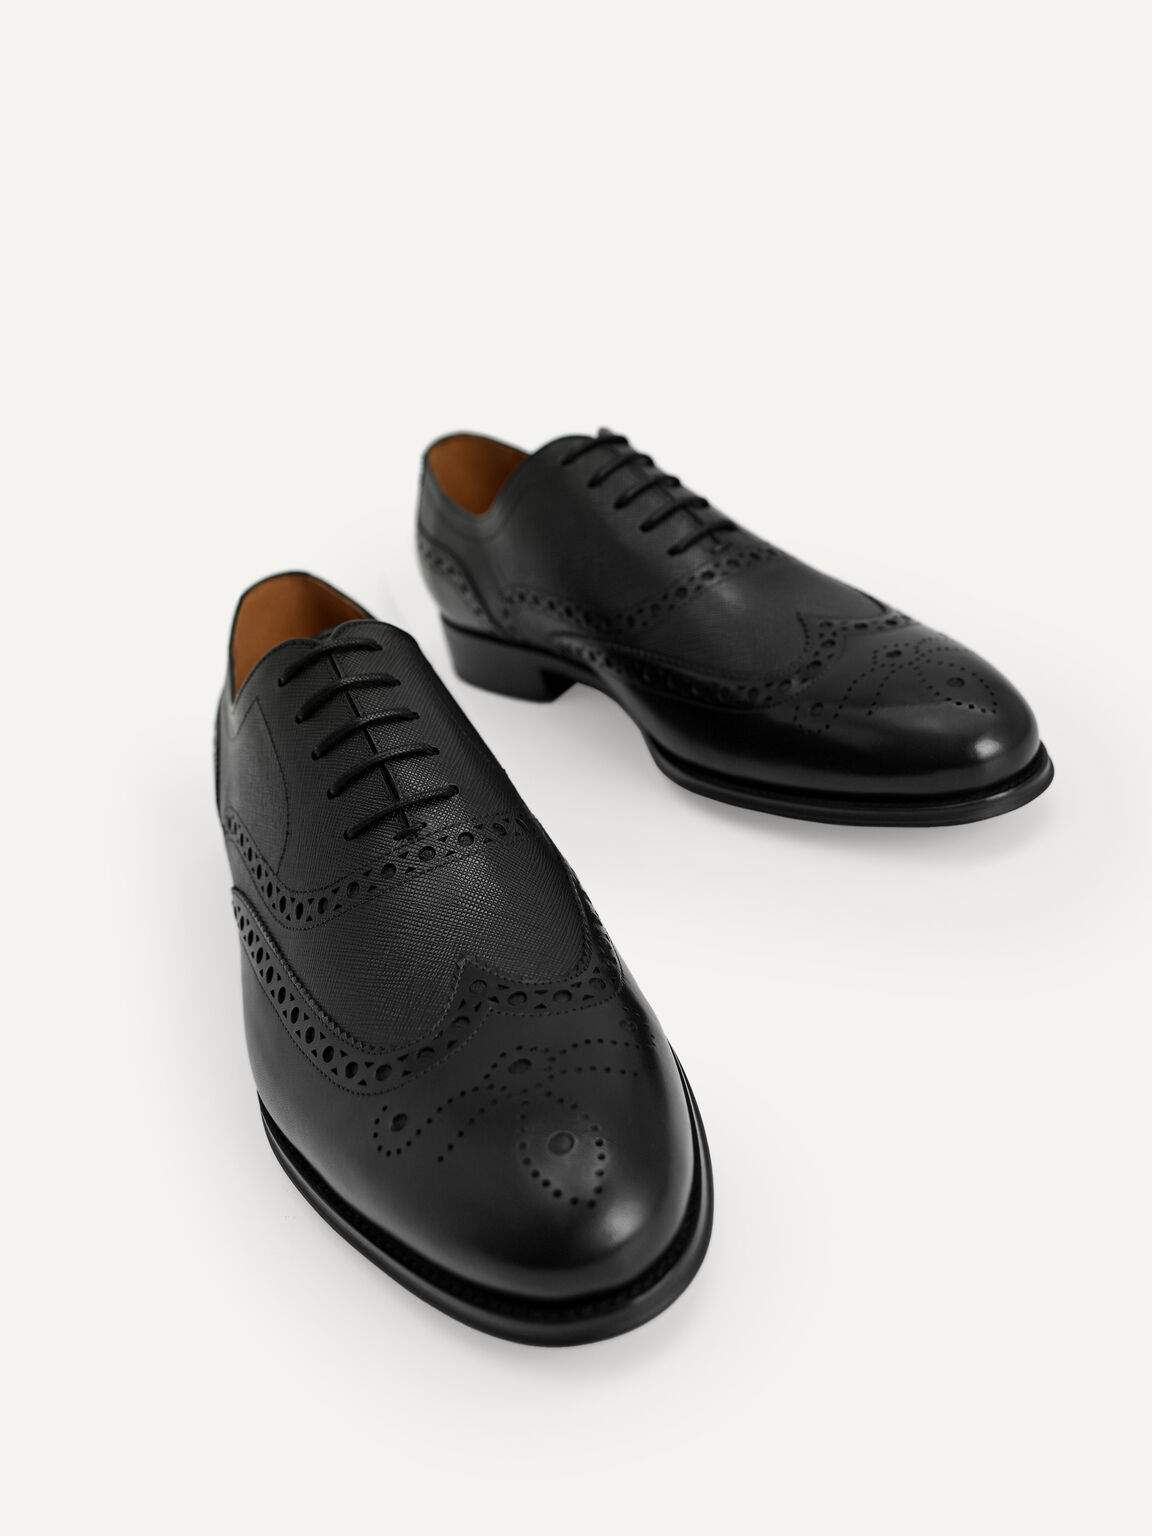 Textured Brogue Oxford Shoes, Black